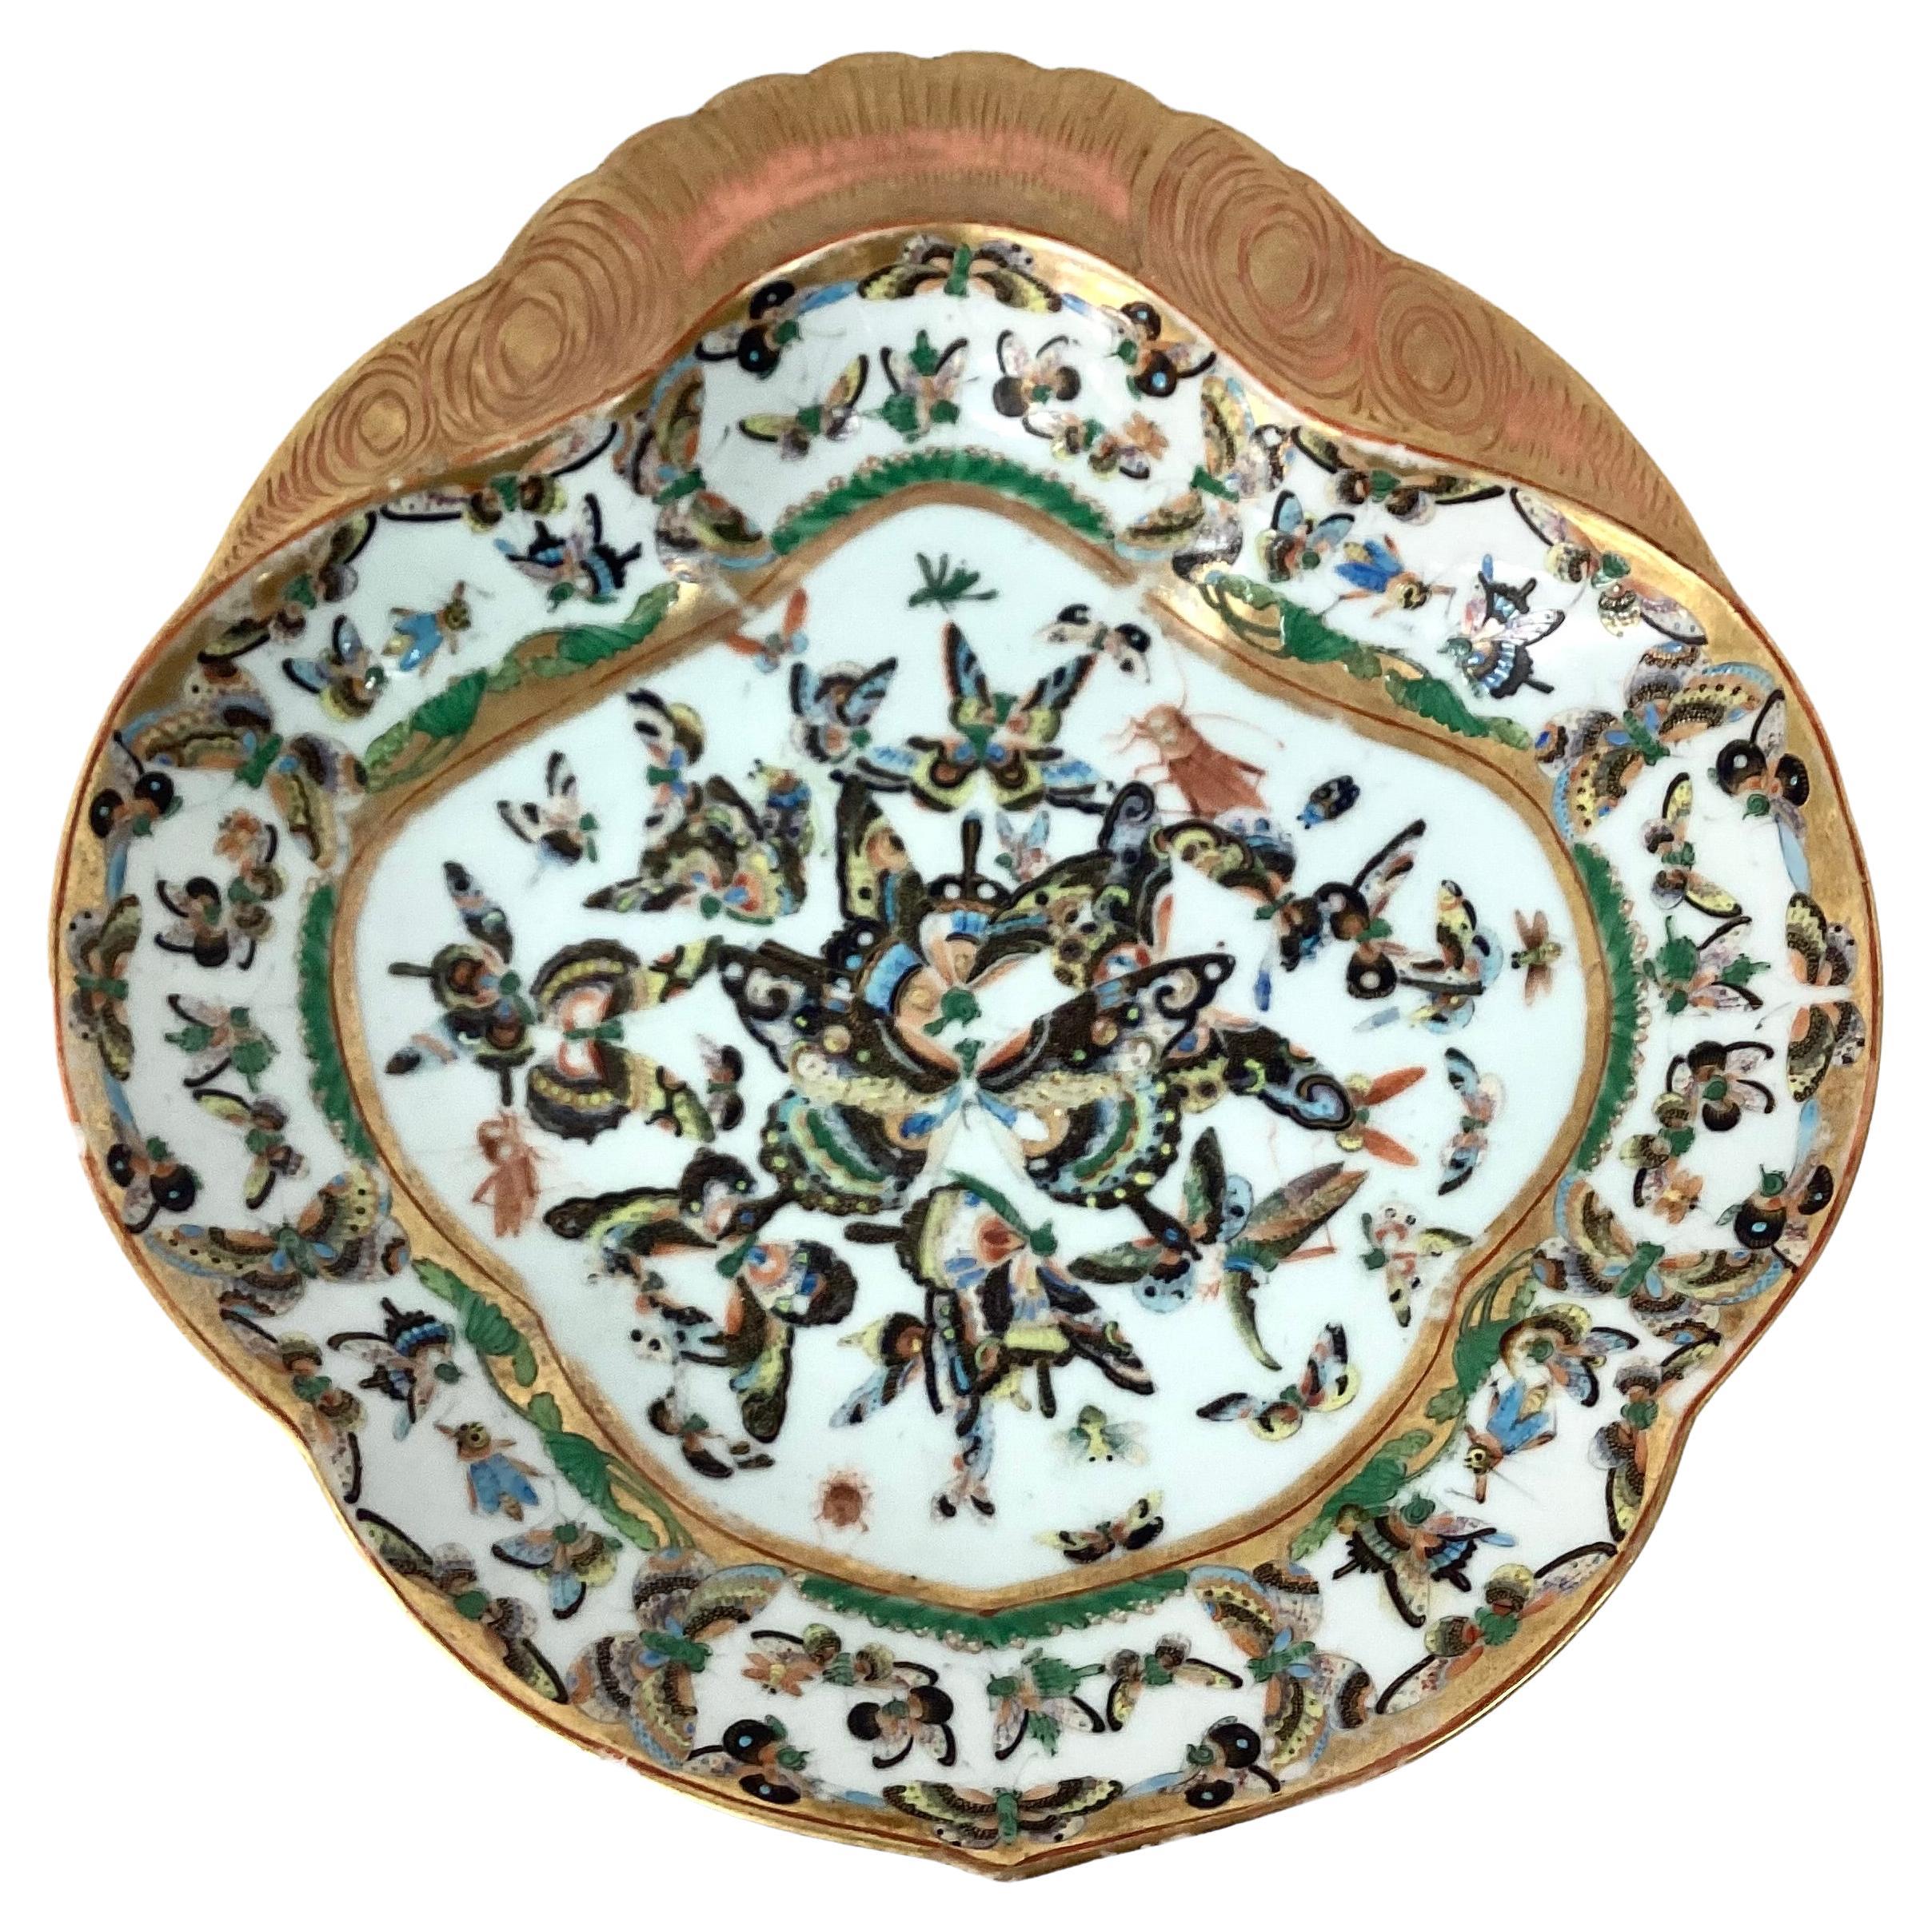 Rare pair of antique Chinese export porcelain butterfly serving/shrimp dish. Unique pair of dishes that include large gilt rim and trim on plates decorated with butterflies in green, black, yellow and gold colors. 